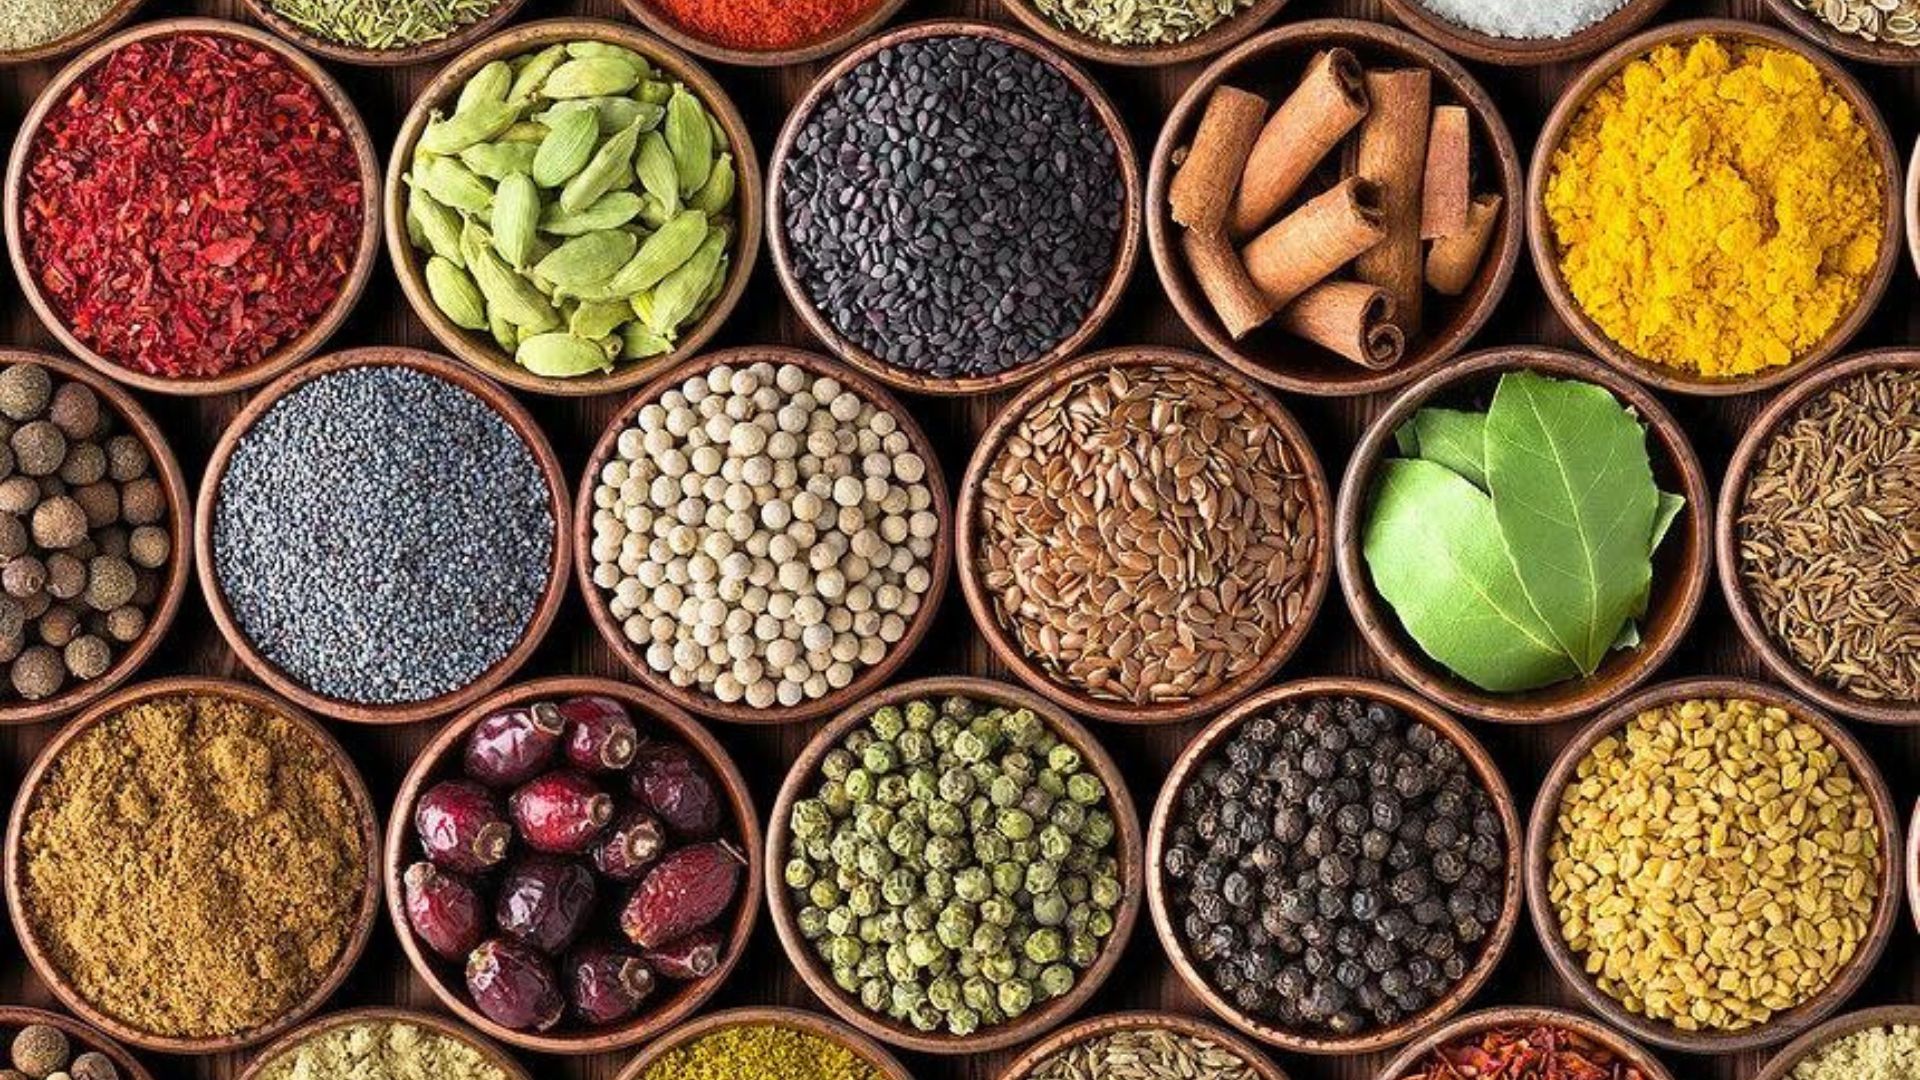 Spices Board steps to enhance safety, quality of Indian spices